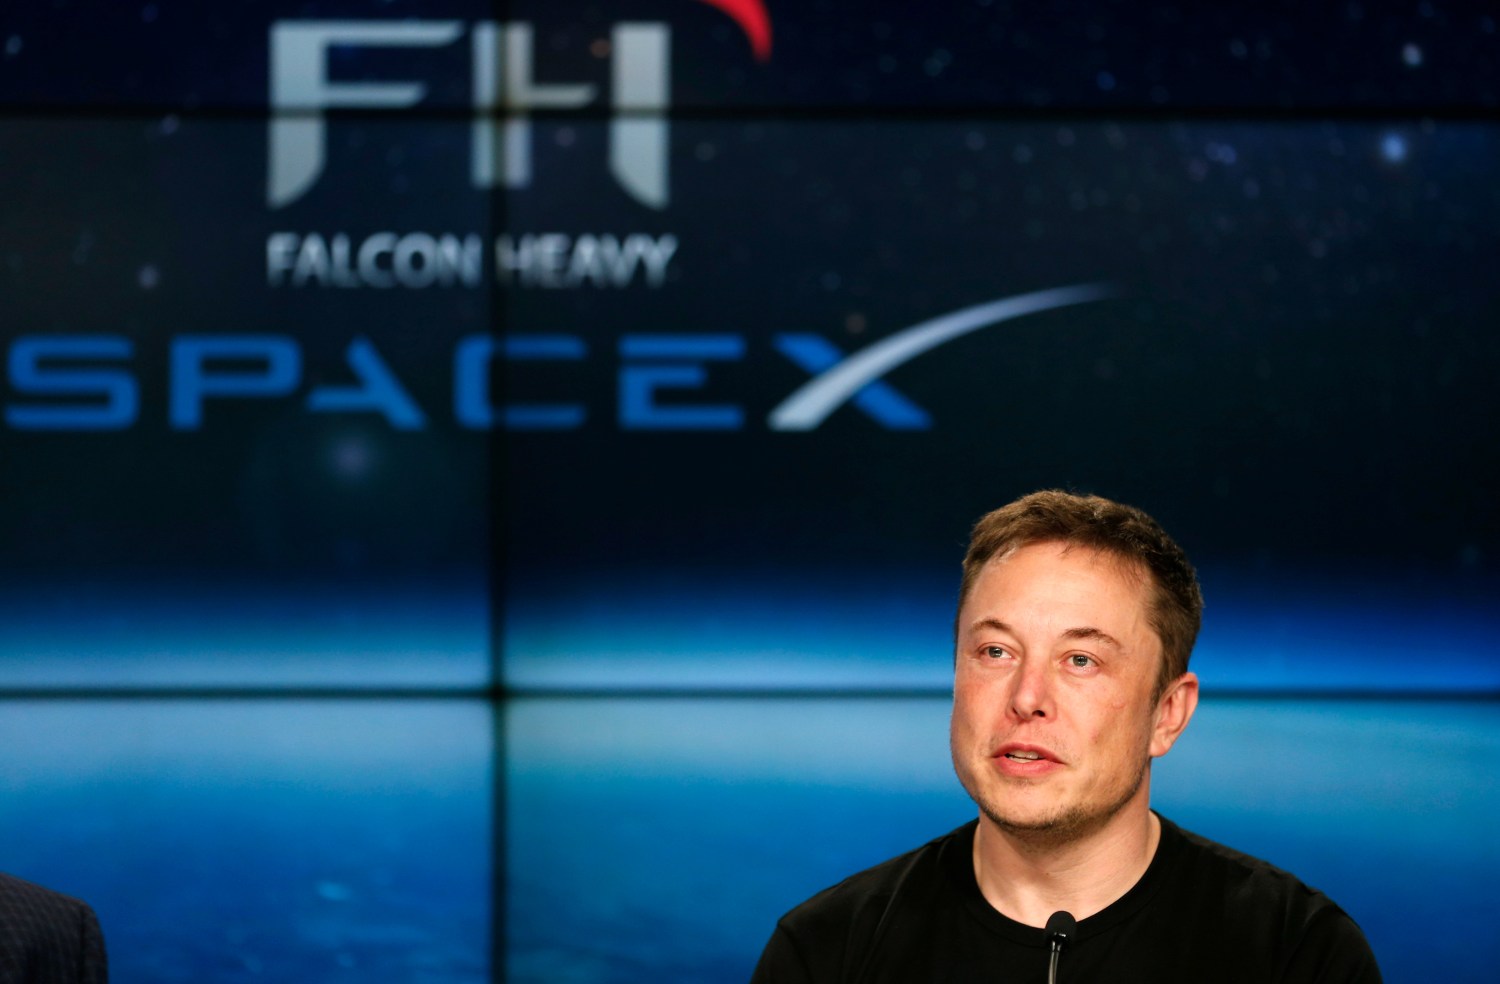 FILE PHOTO: SpaceX founder Elon Musk speaks at a press conference following the first launch of a SpaceX Falcon Heavy rocket at the Kennedy Space Center in Cape Canaveral, Florida, U.S., February 6, 2018. REUTERS/Joe Skipper/File Photo - RC15B6B3A870